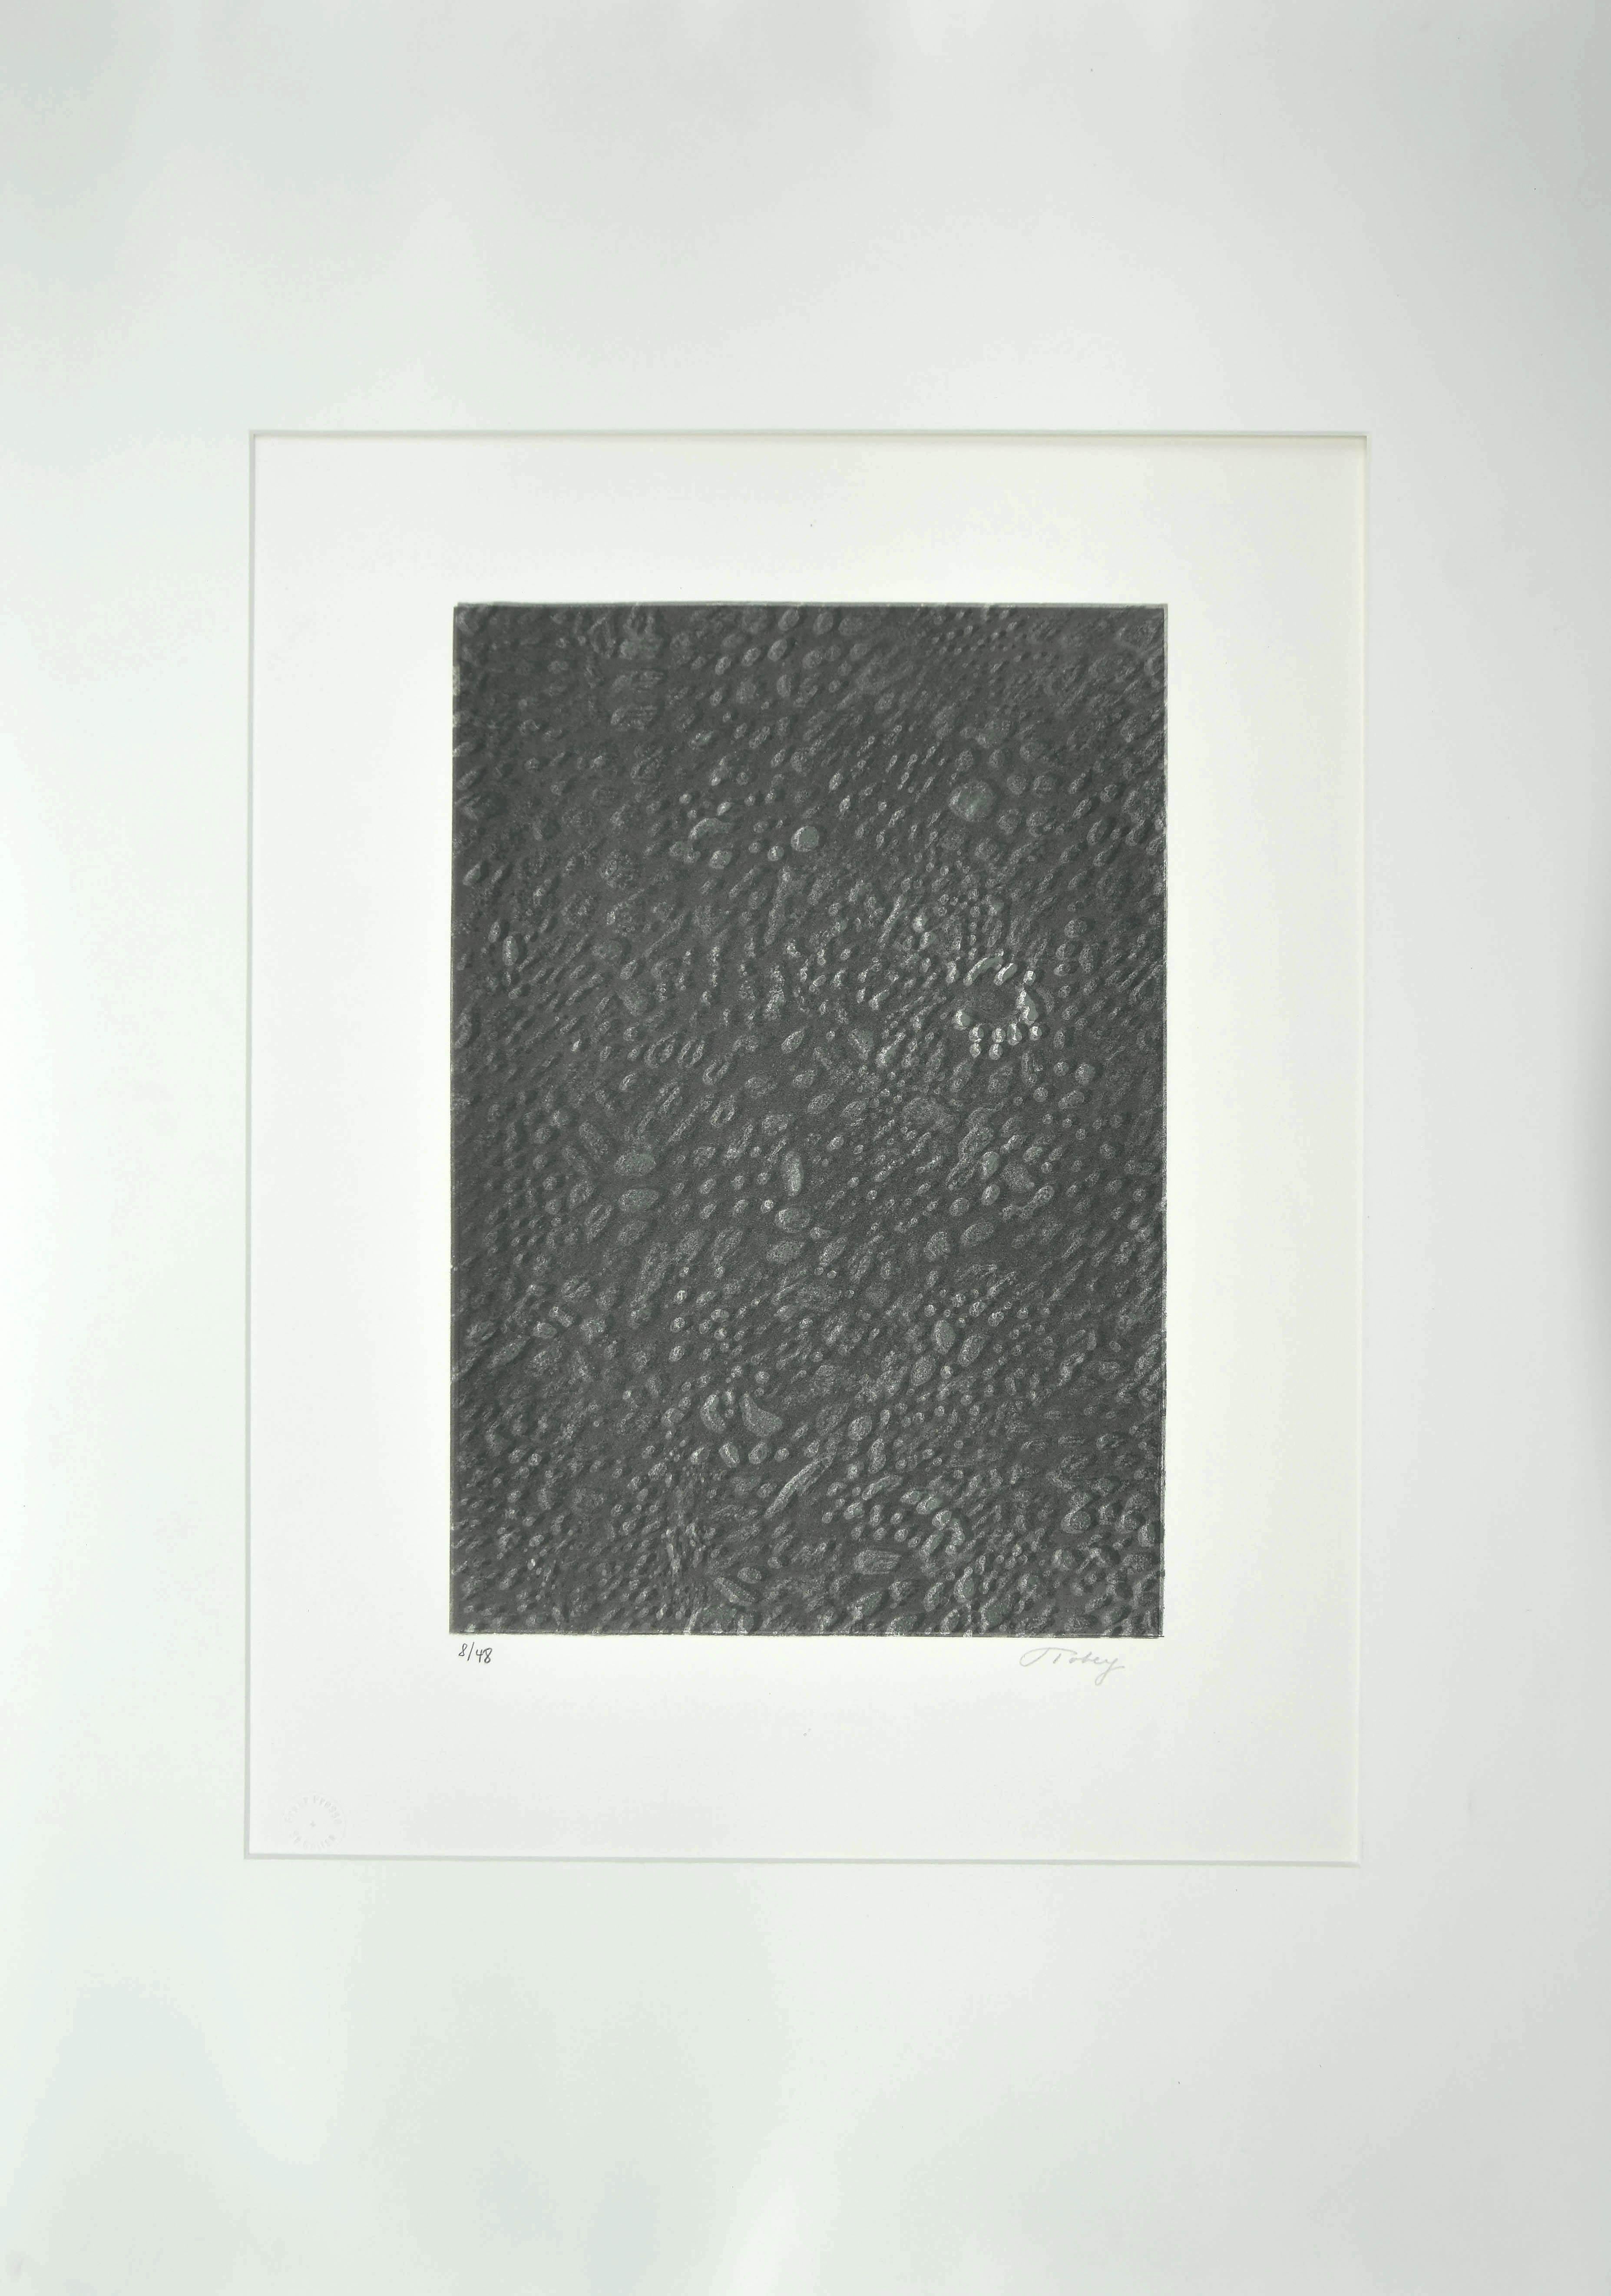 Untitled - Original Lithograph by Mark Tobey - 1970s 2